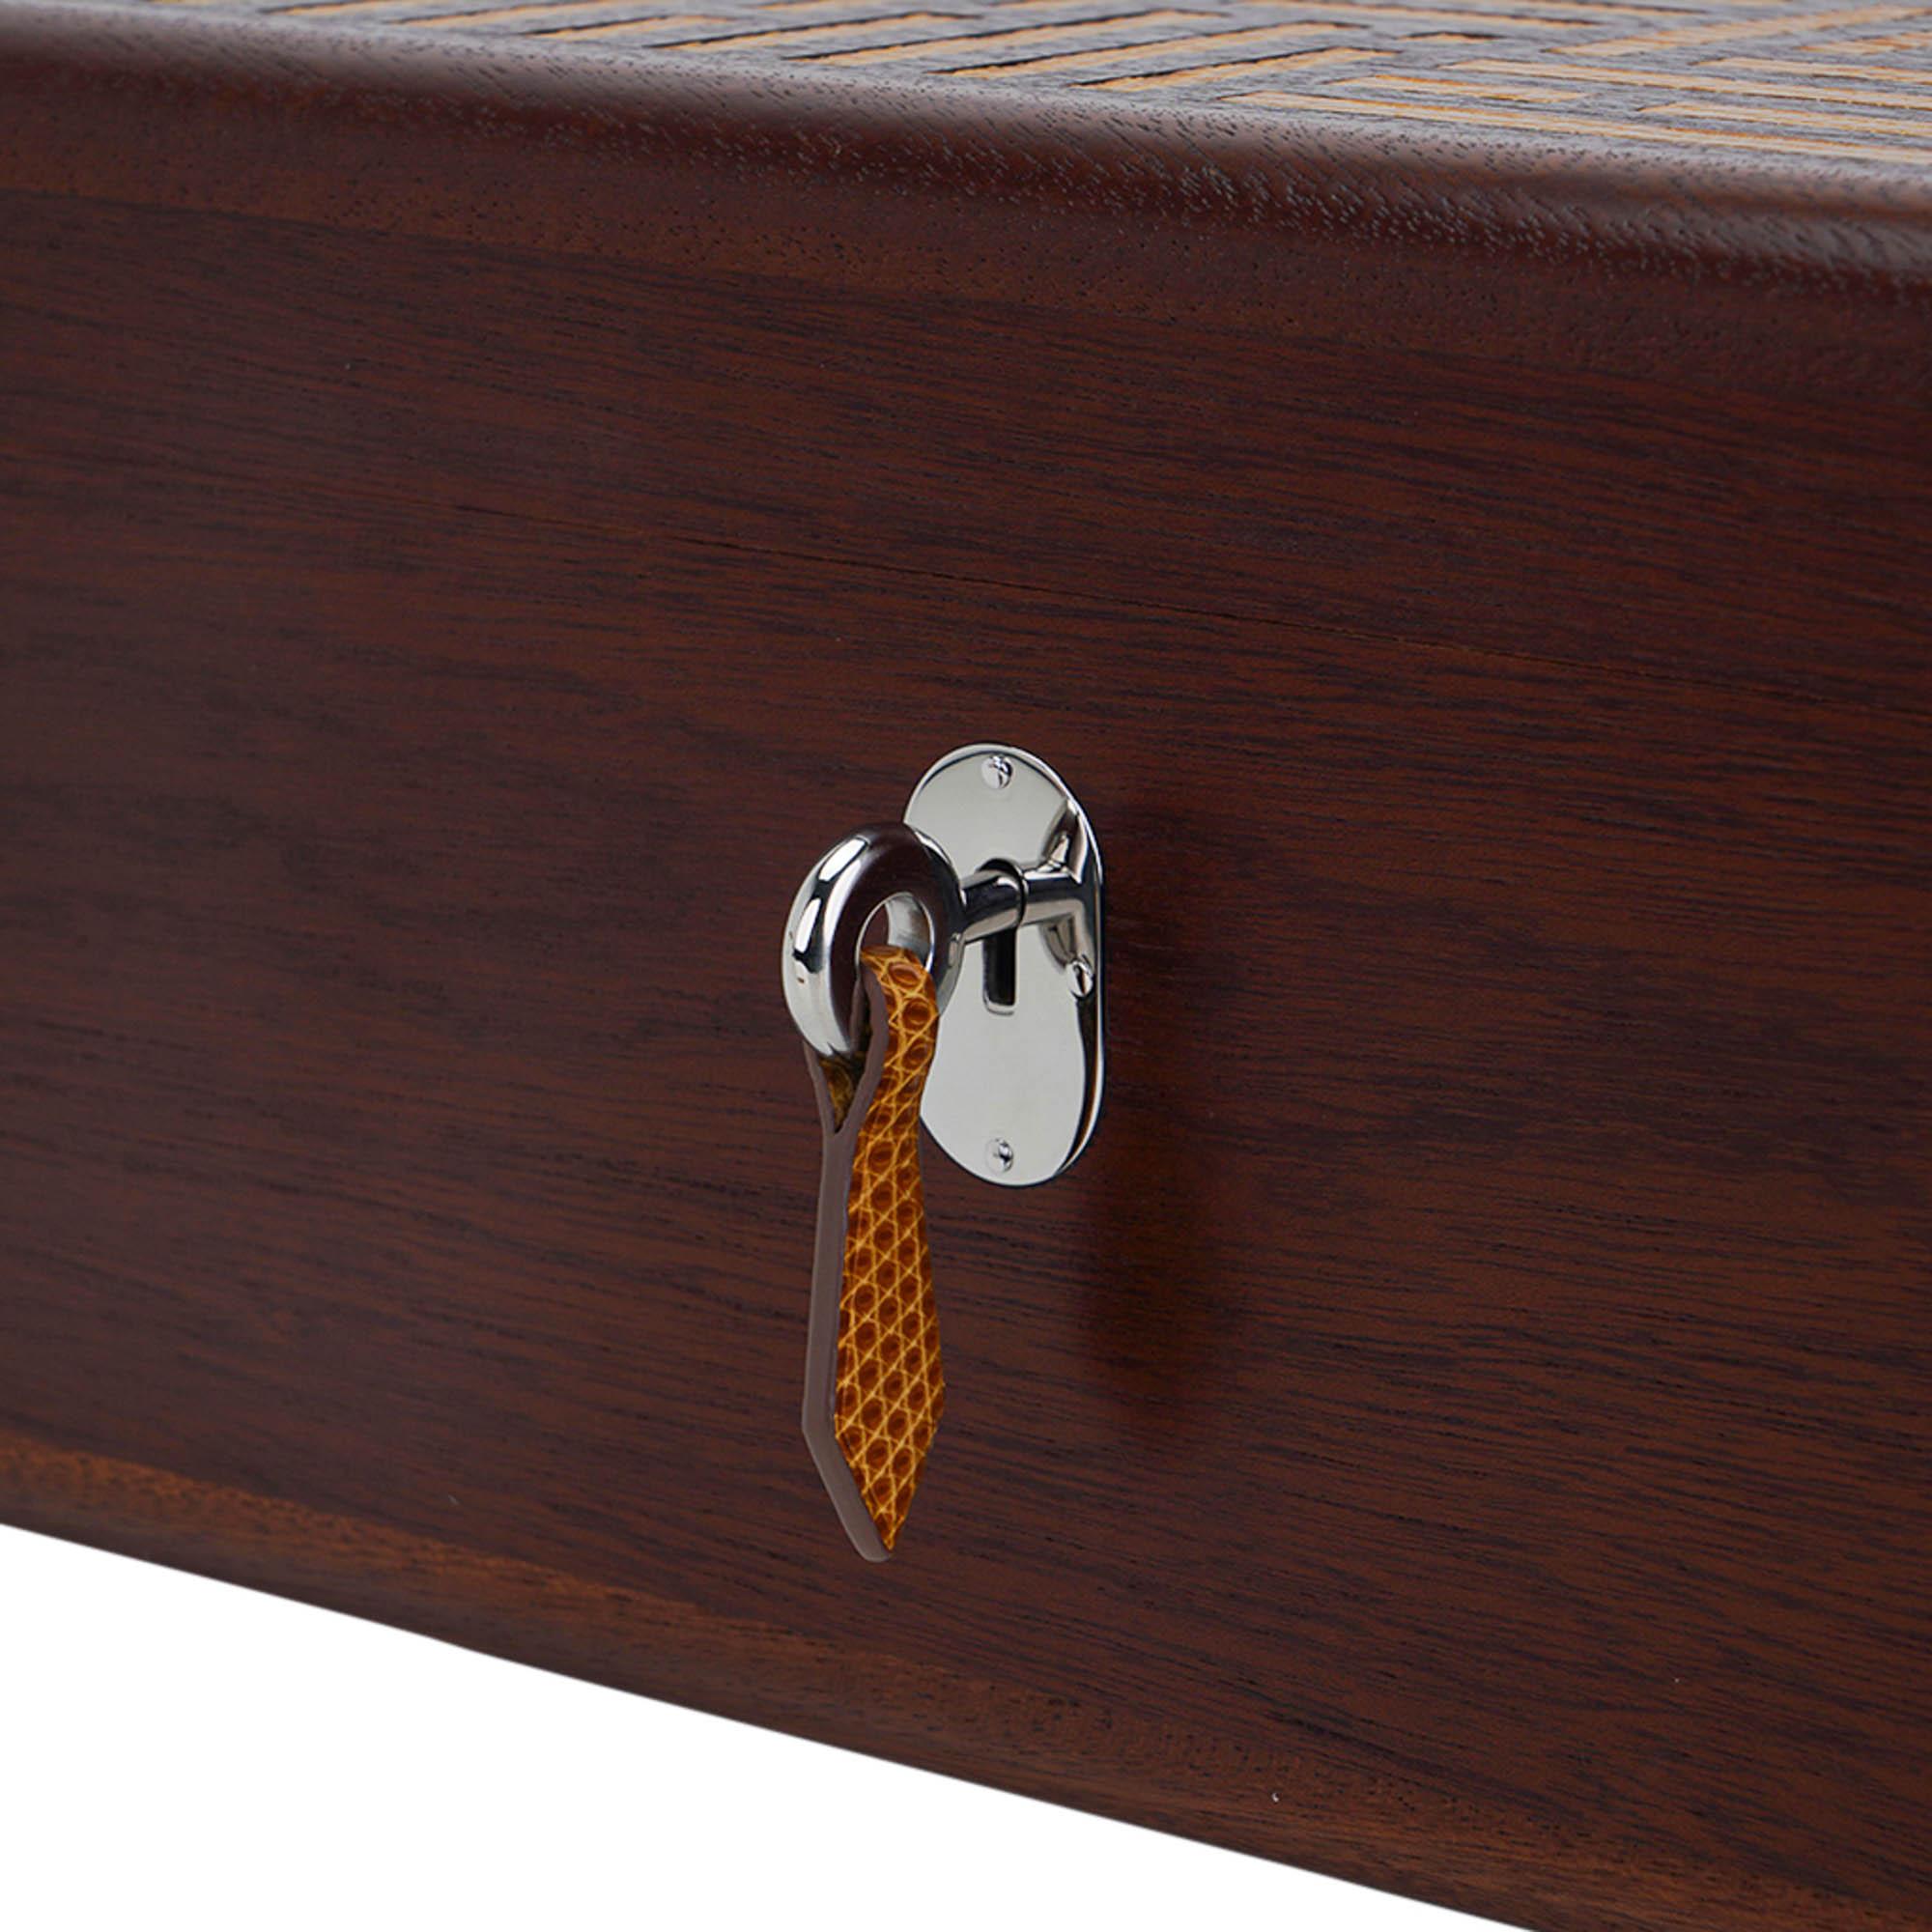 Hermes Coffret a Cigares Humidor Limited Edition Sycamore Wood Sesame Lizard For Sale 11